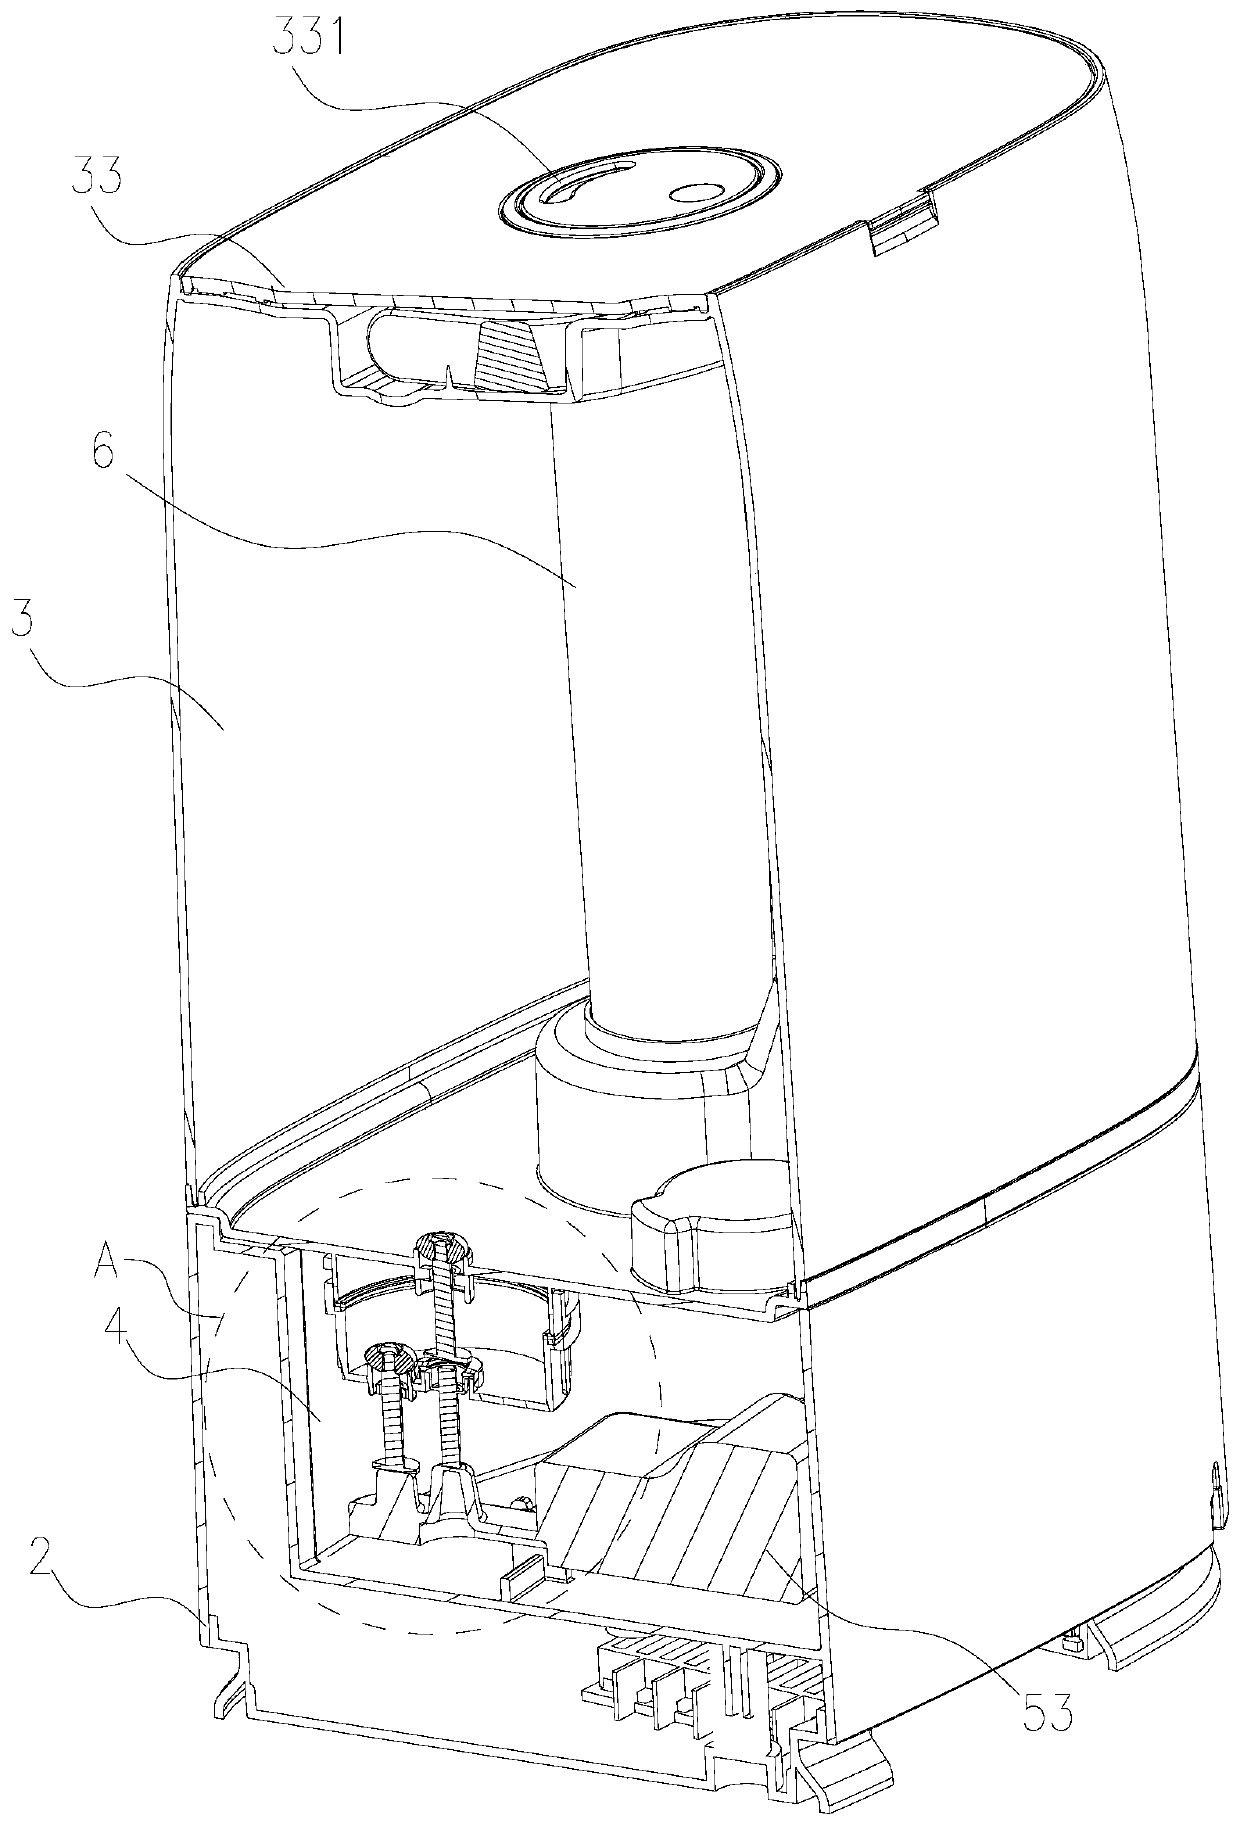 Water tank with dual water valve and humidifier